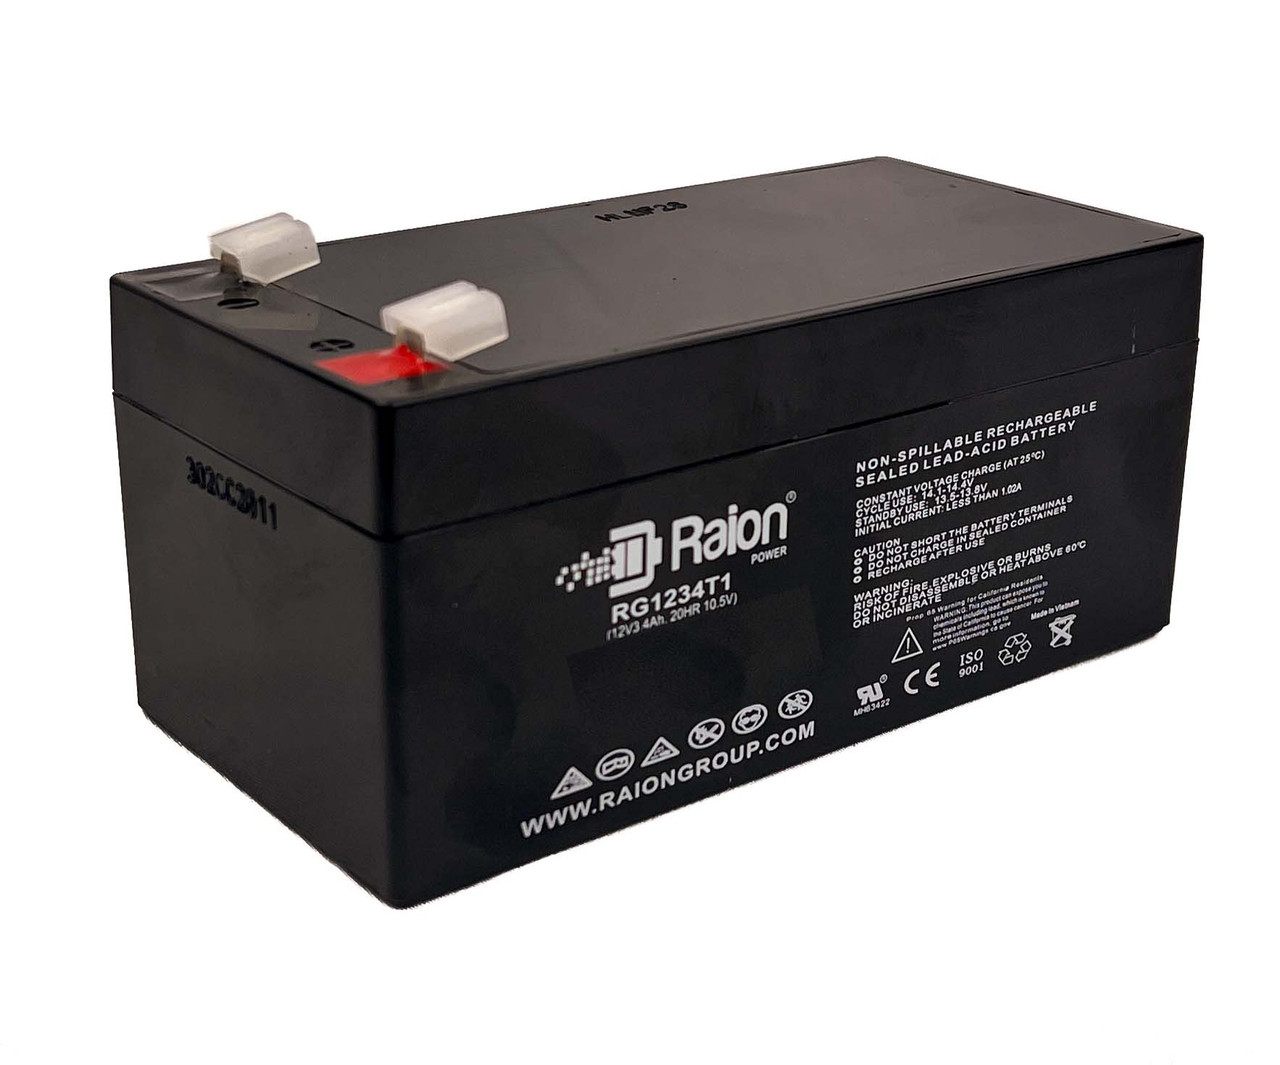 Raion Power 12V 3.4Ah Non-Spillable Replacement Battery for Embassy Crown 12CE3